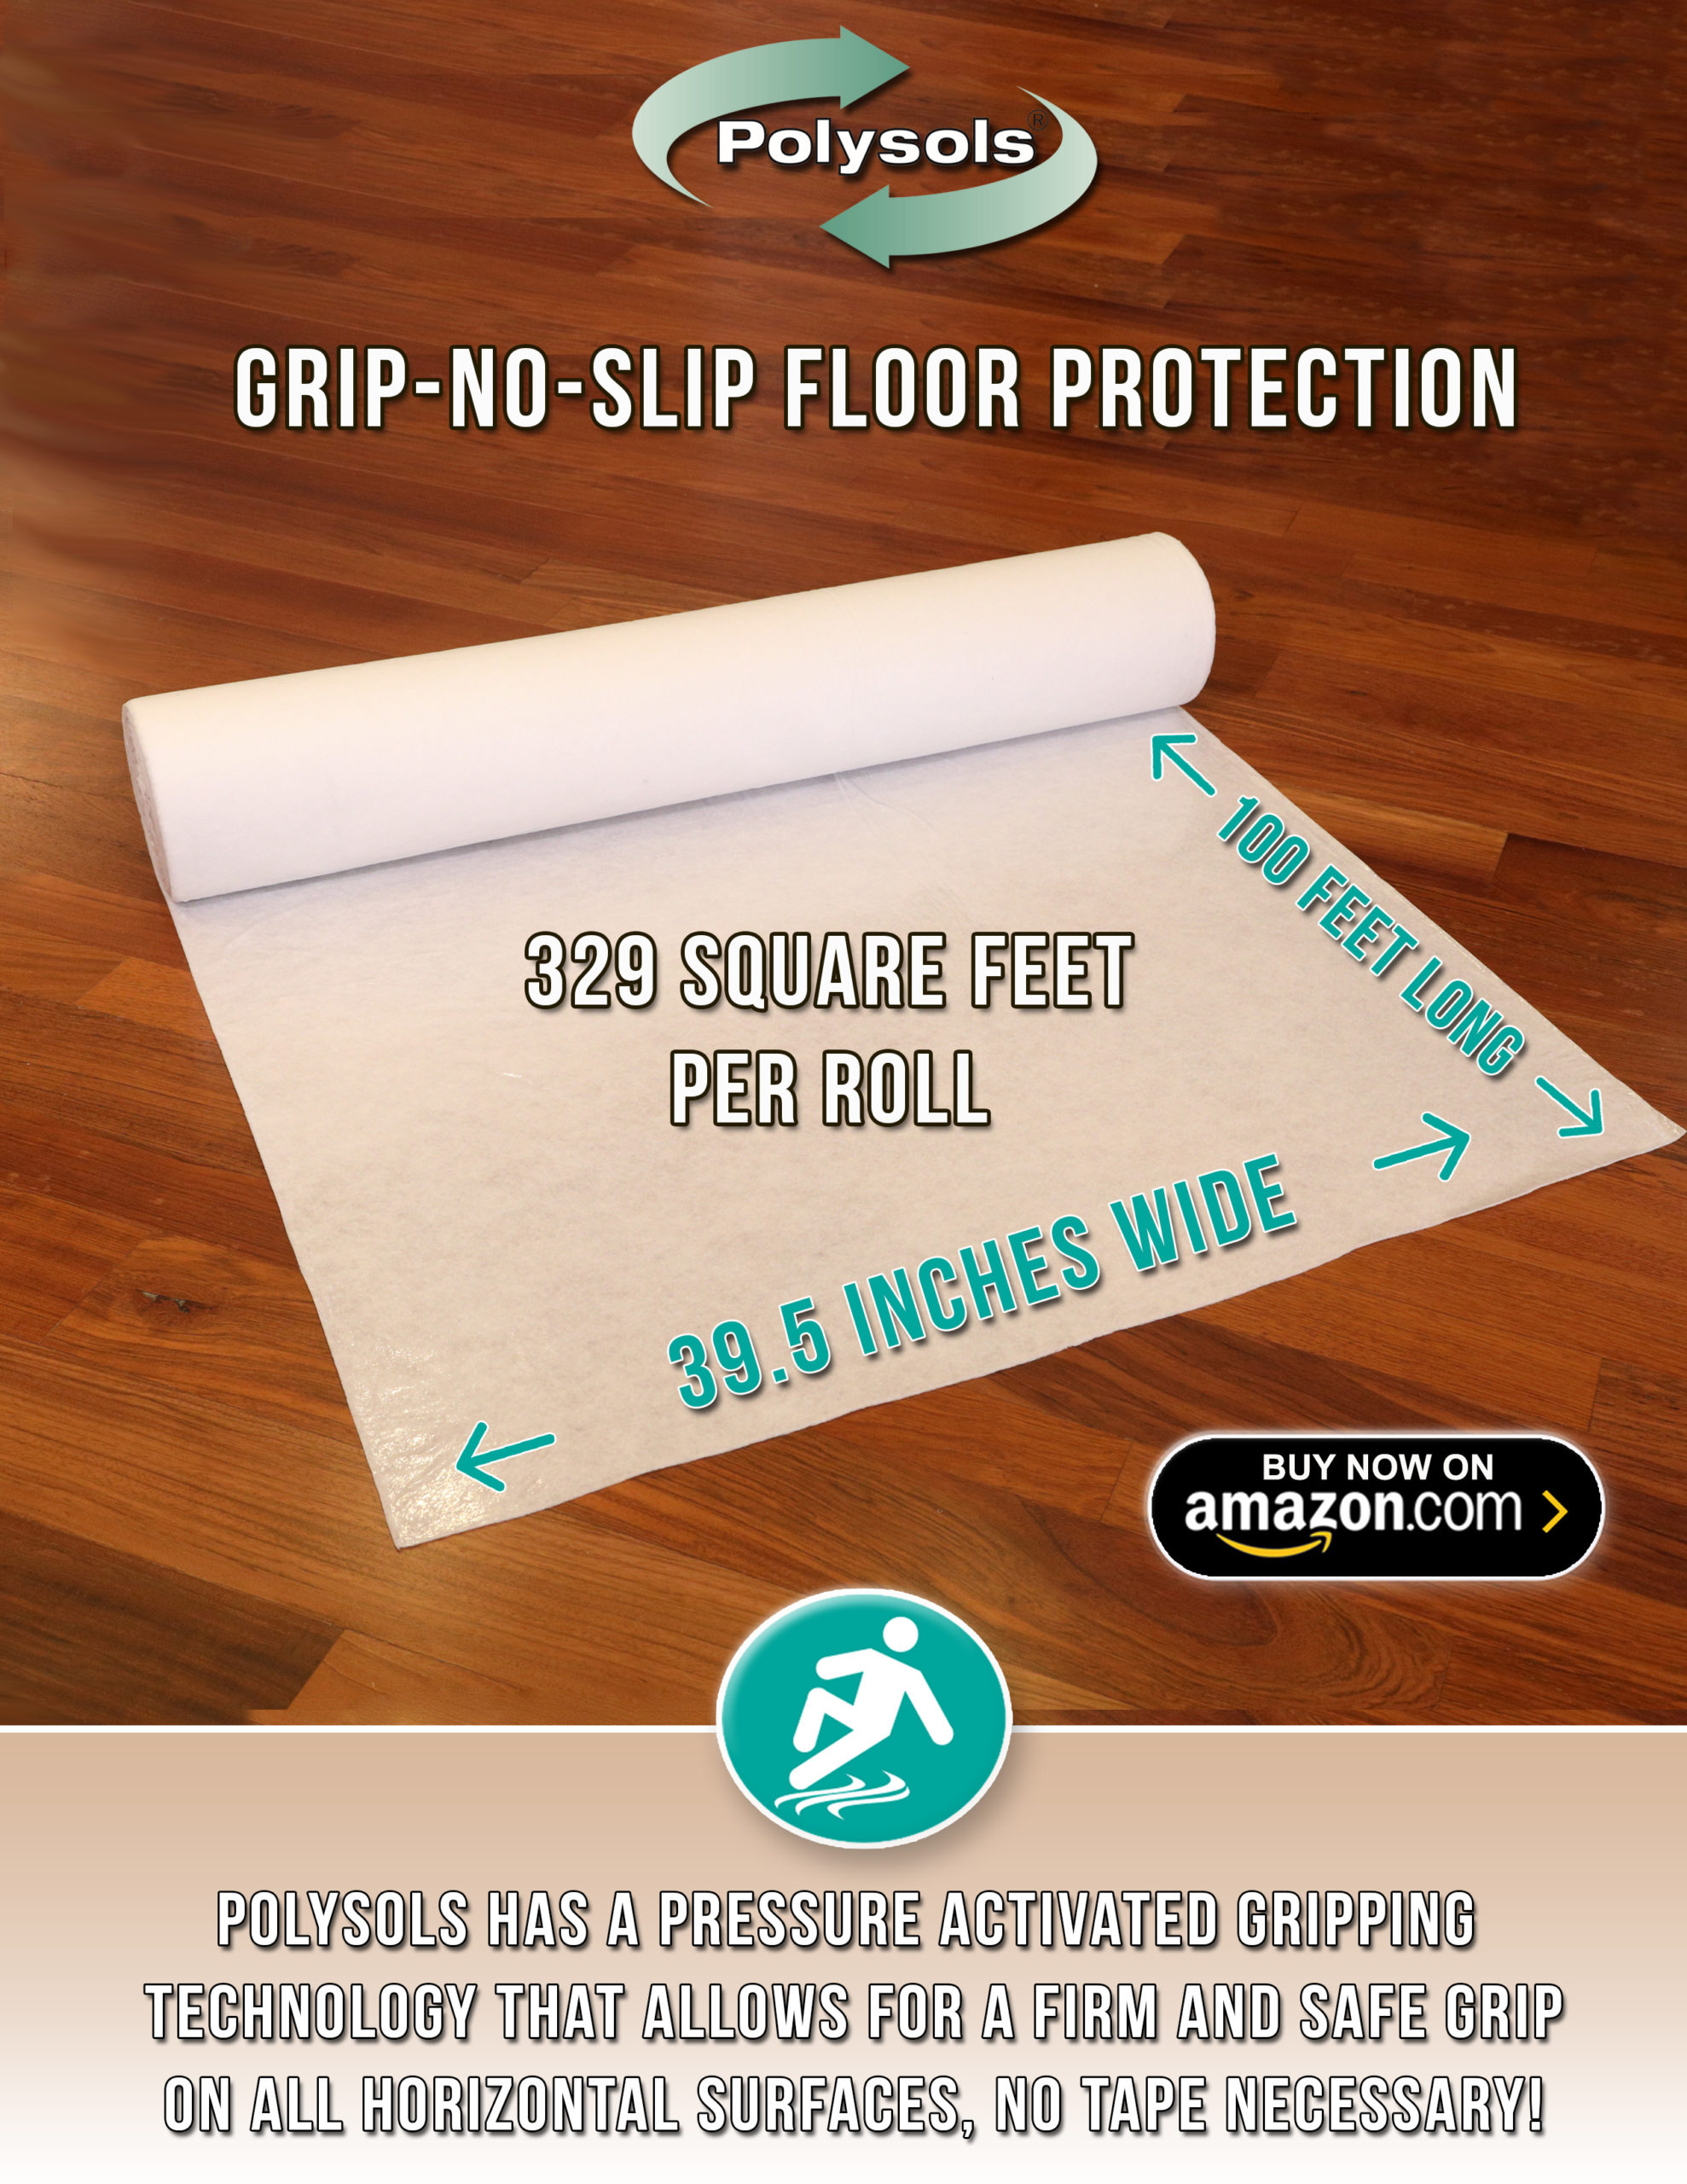 Polysols Heavy Duty Floor Film- Self Adhesive- Floor Protection for Hardwood Floors and Tile. Made in USA. Polysols Floor Film and plastic sheeting heavy duty for construction and DIY projects. Polysols 39.5 inch Floor Covering by 100 Feet Long.